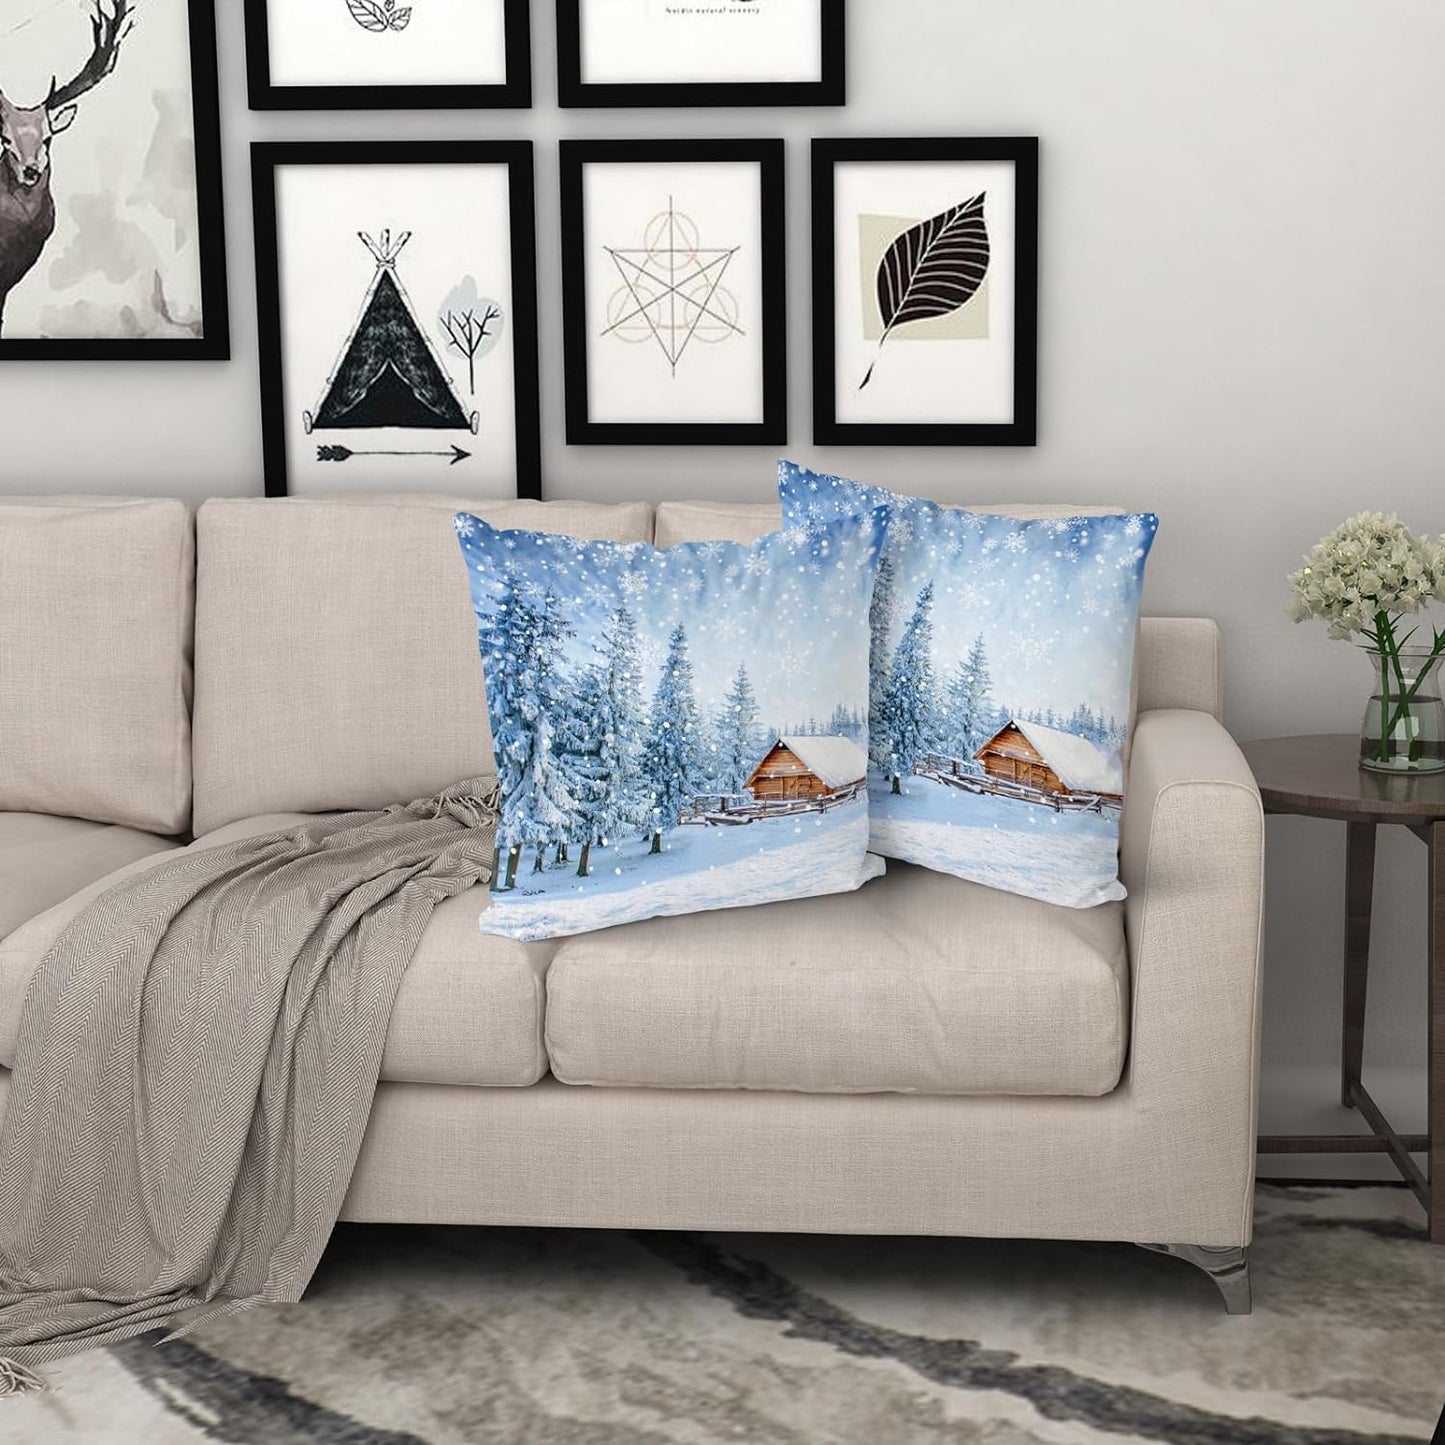 Knicewhome Blue White Winter Pillow Covers 18x18 Inch Set of 2 Christmas Trees Silver Snow Decorative Throw Pillows Winter Snow Cotton Square Cushion Case for Bedroom Living Room Home Sofa Couch Outdoor